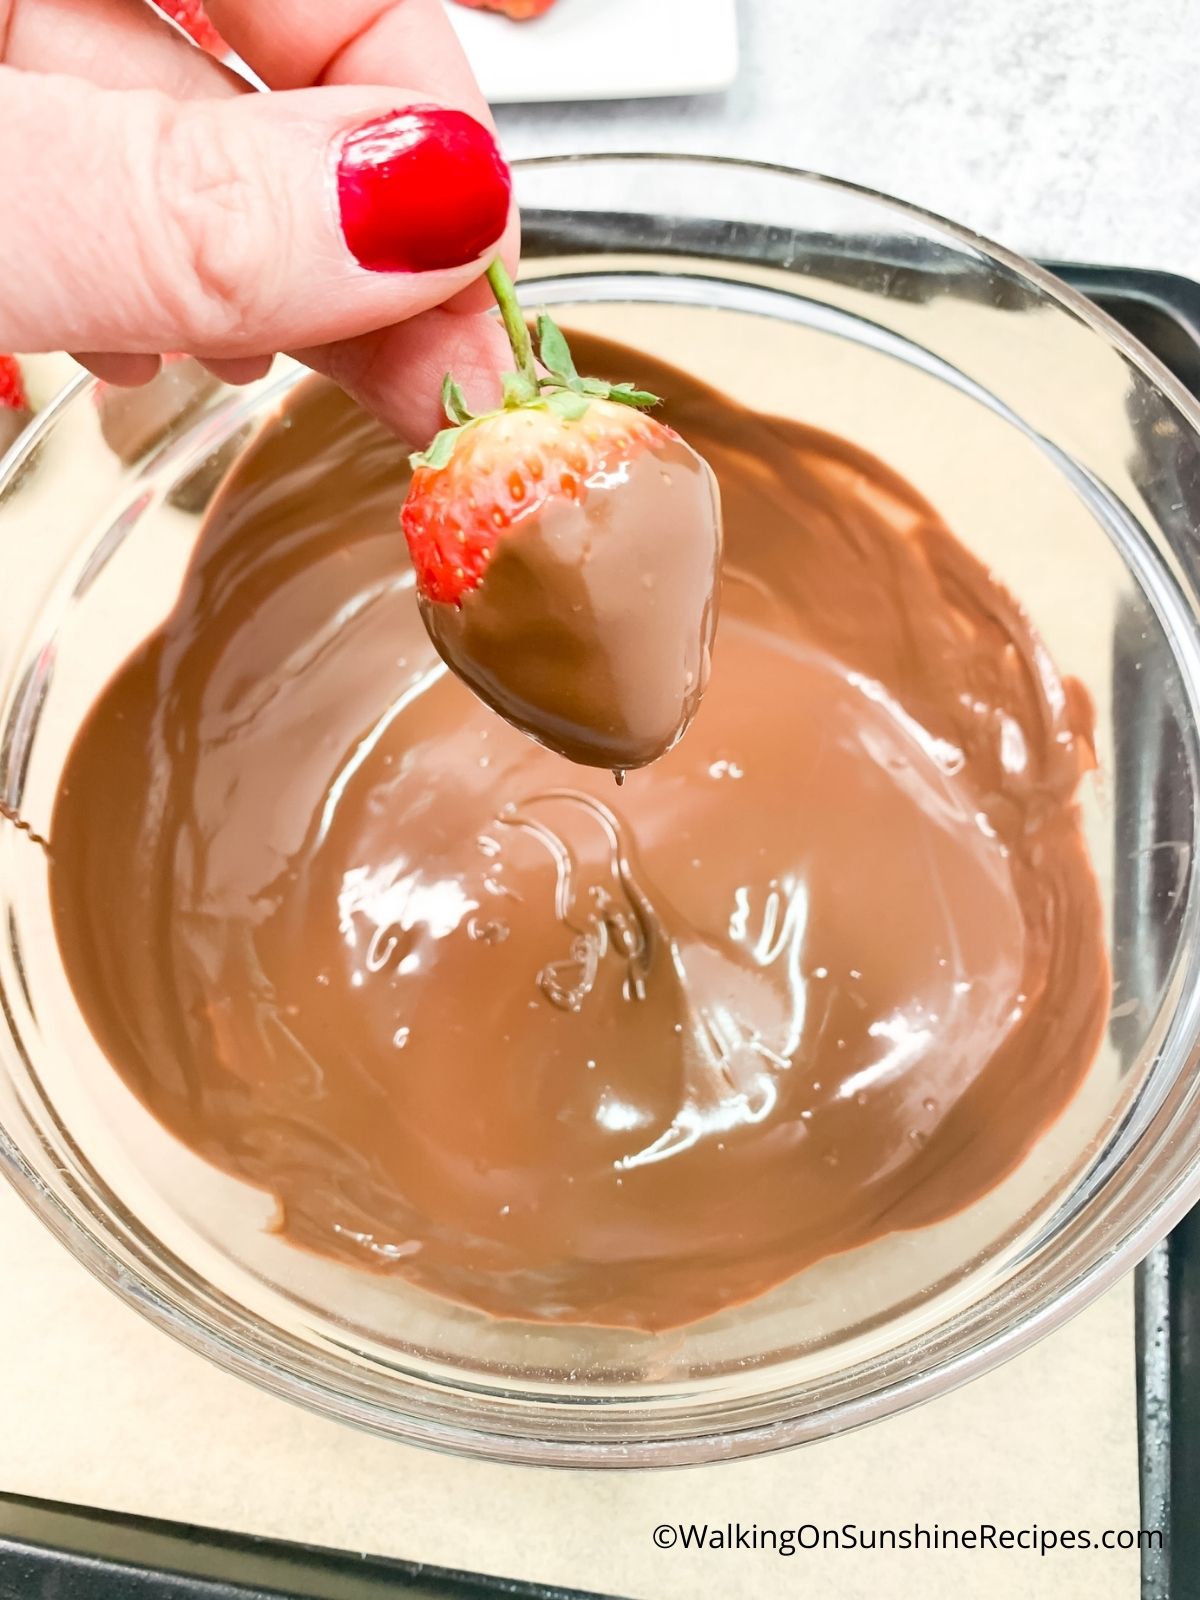 Dip strawberries in melted chocolate.